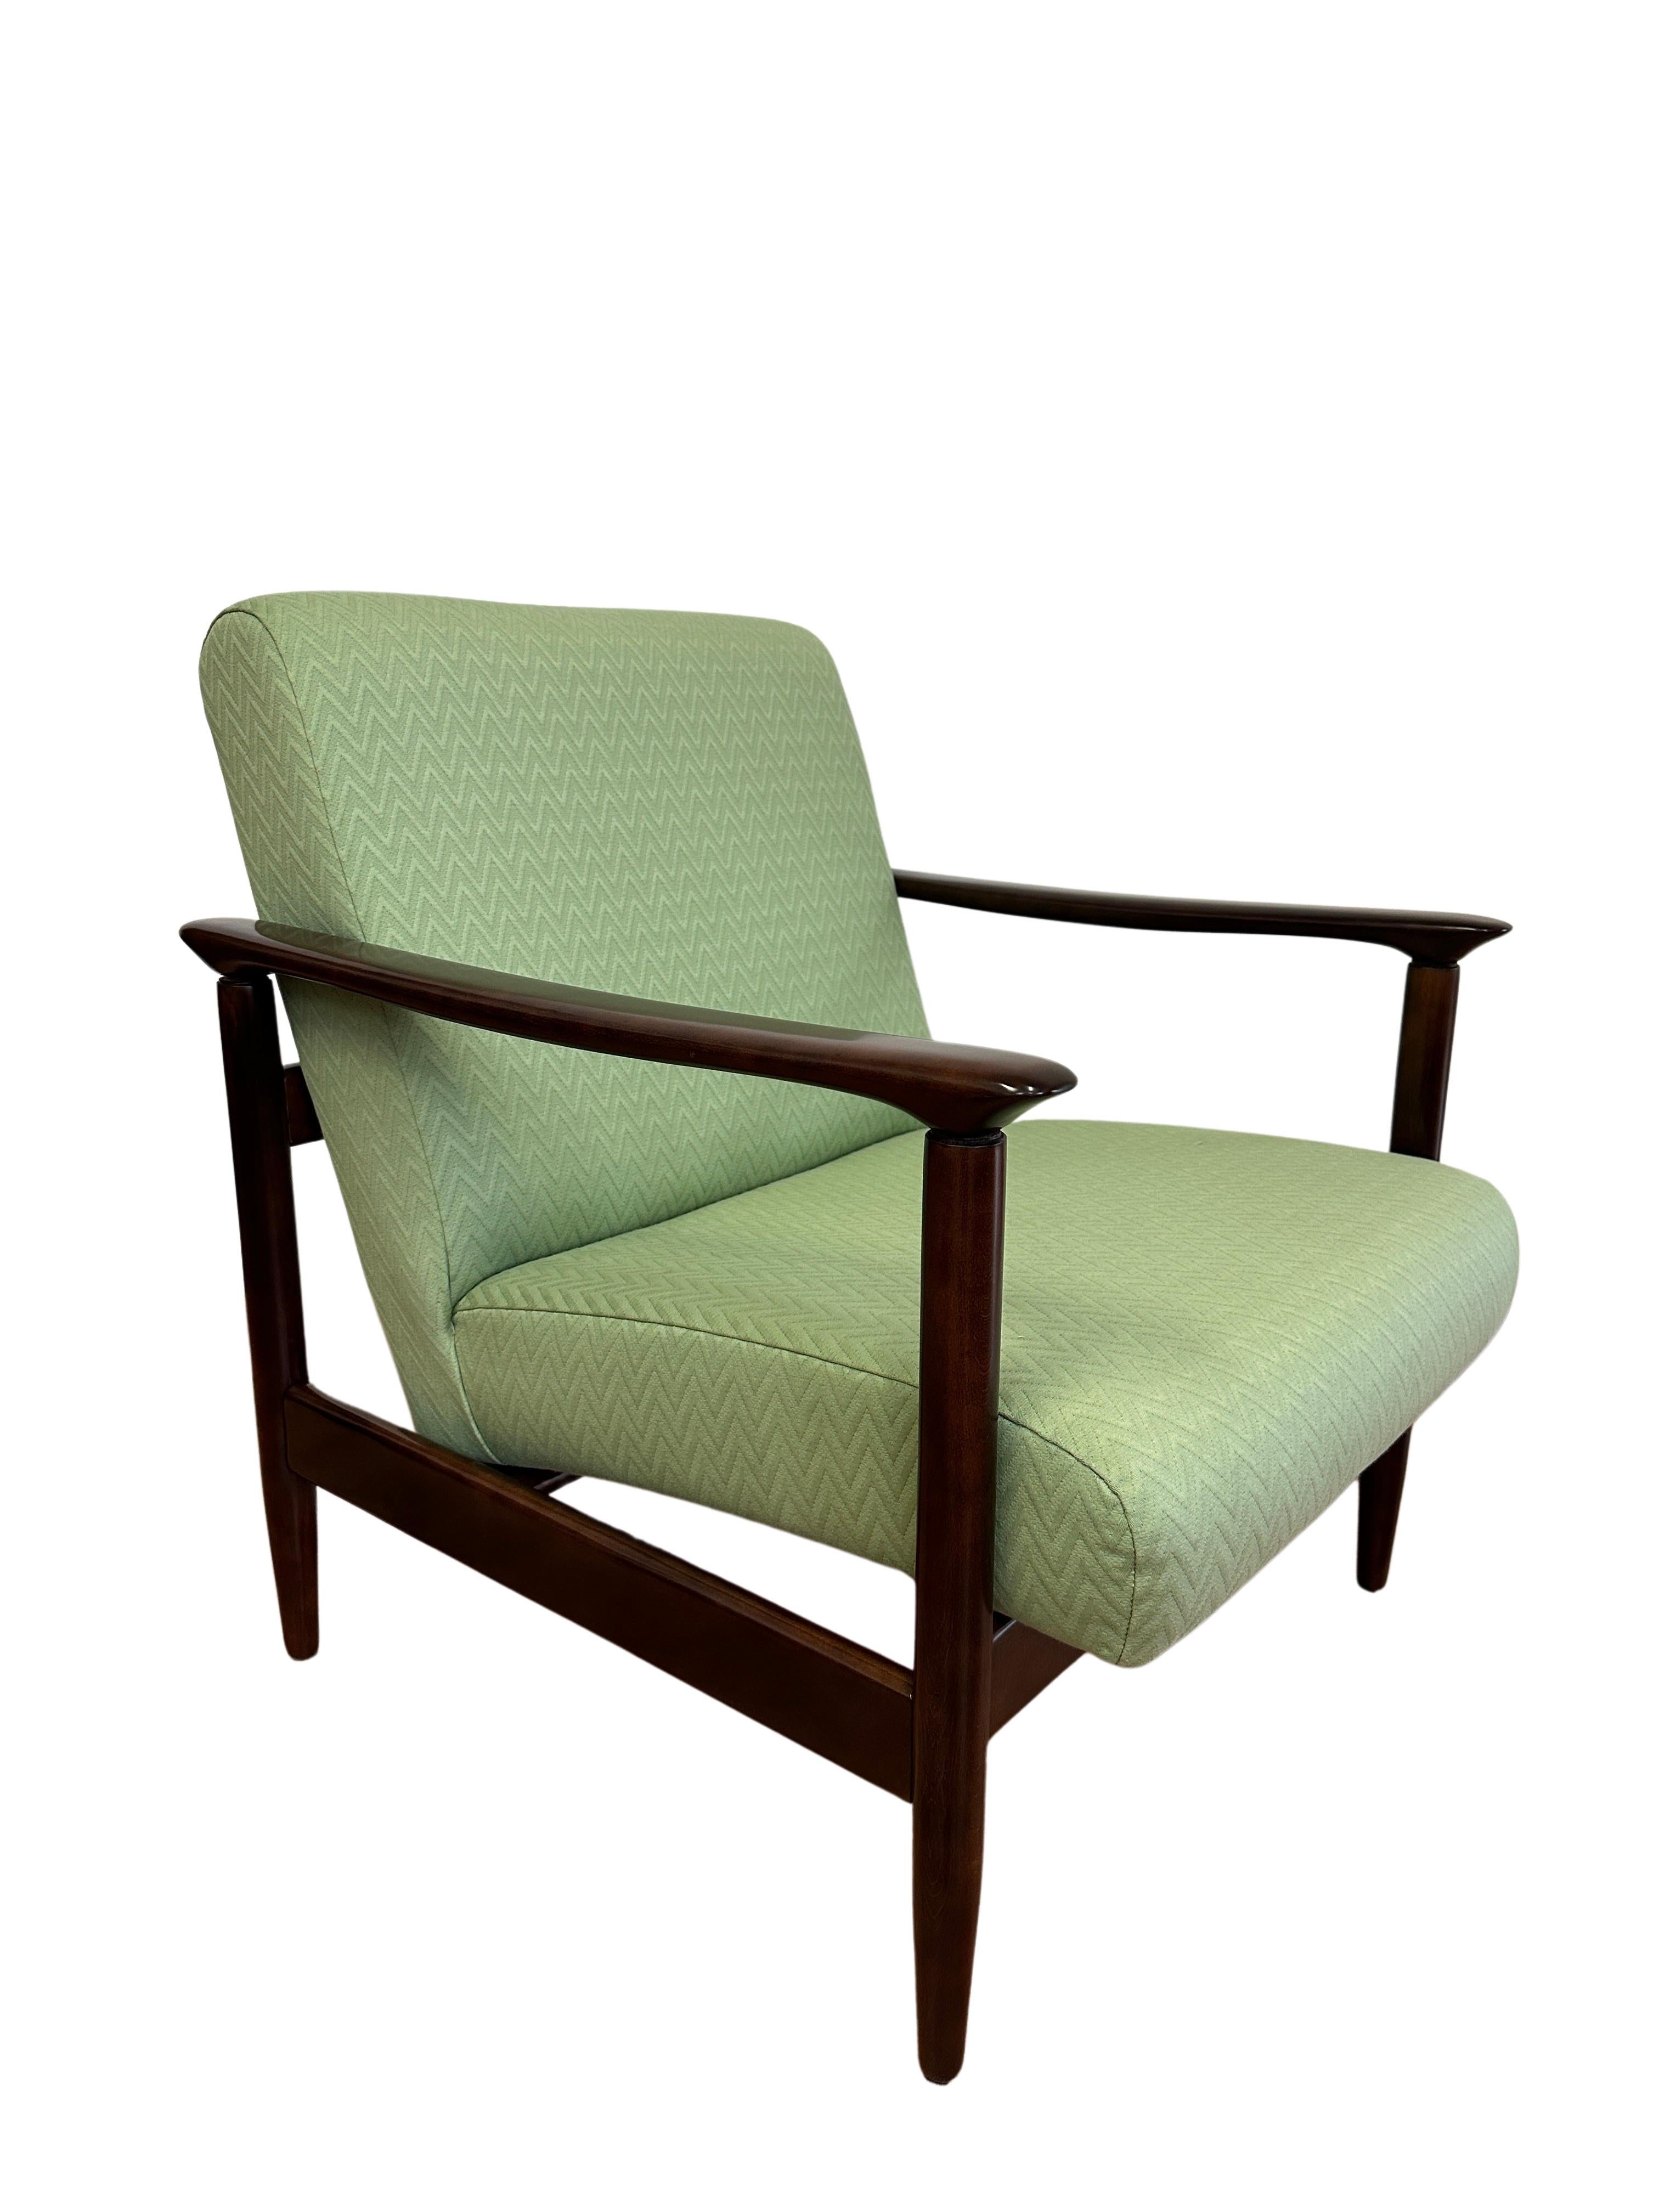 Mid Century Armchair in Green Missoni Upholstery, by Edmund Homa, 1960s For Sale 4